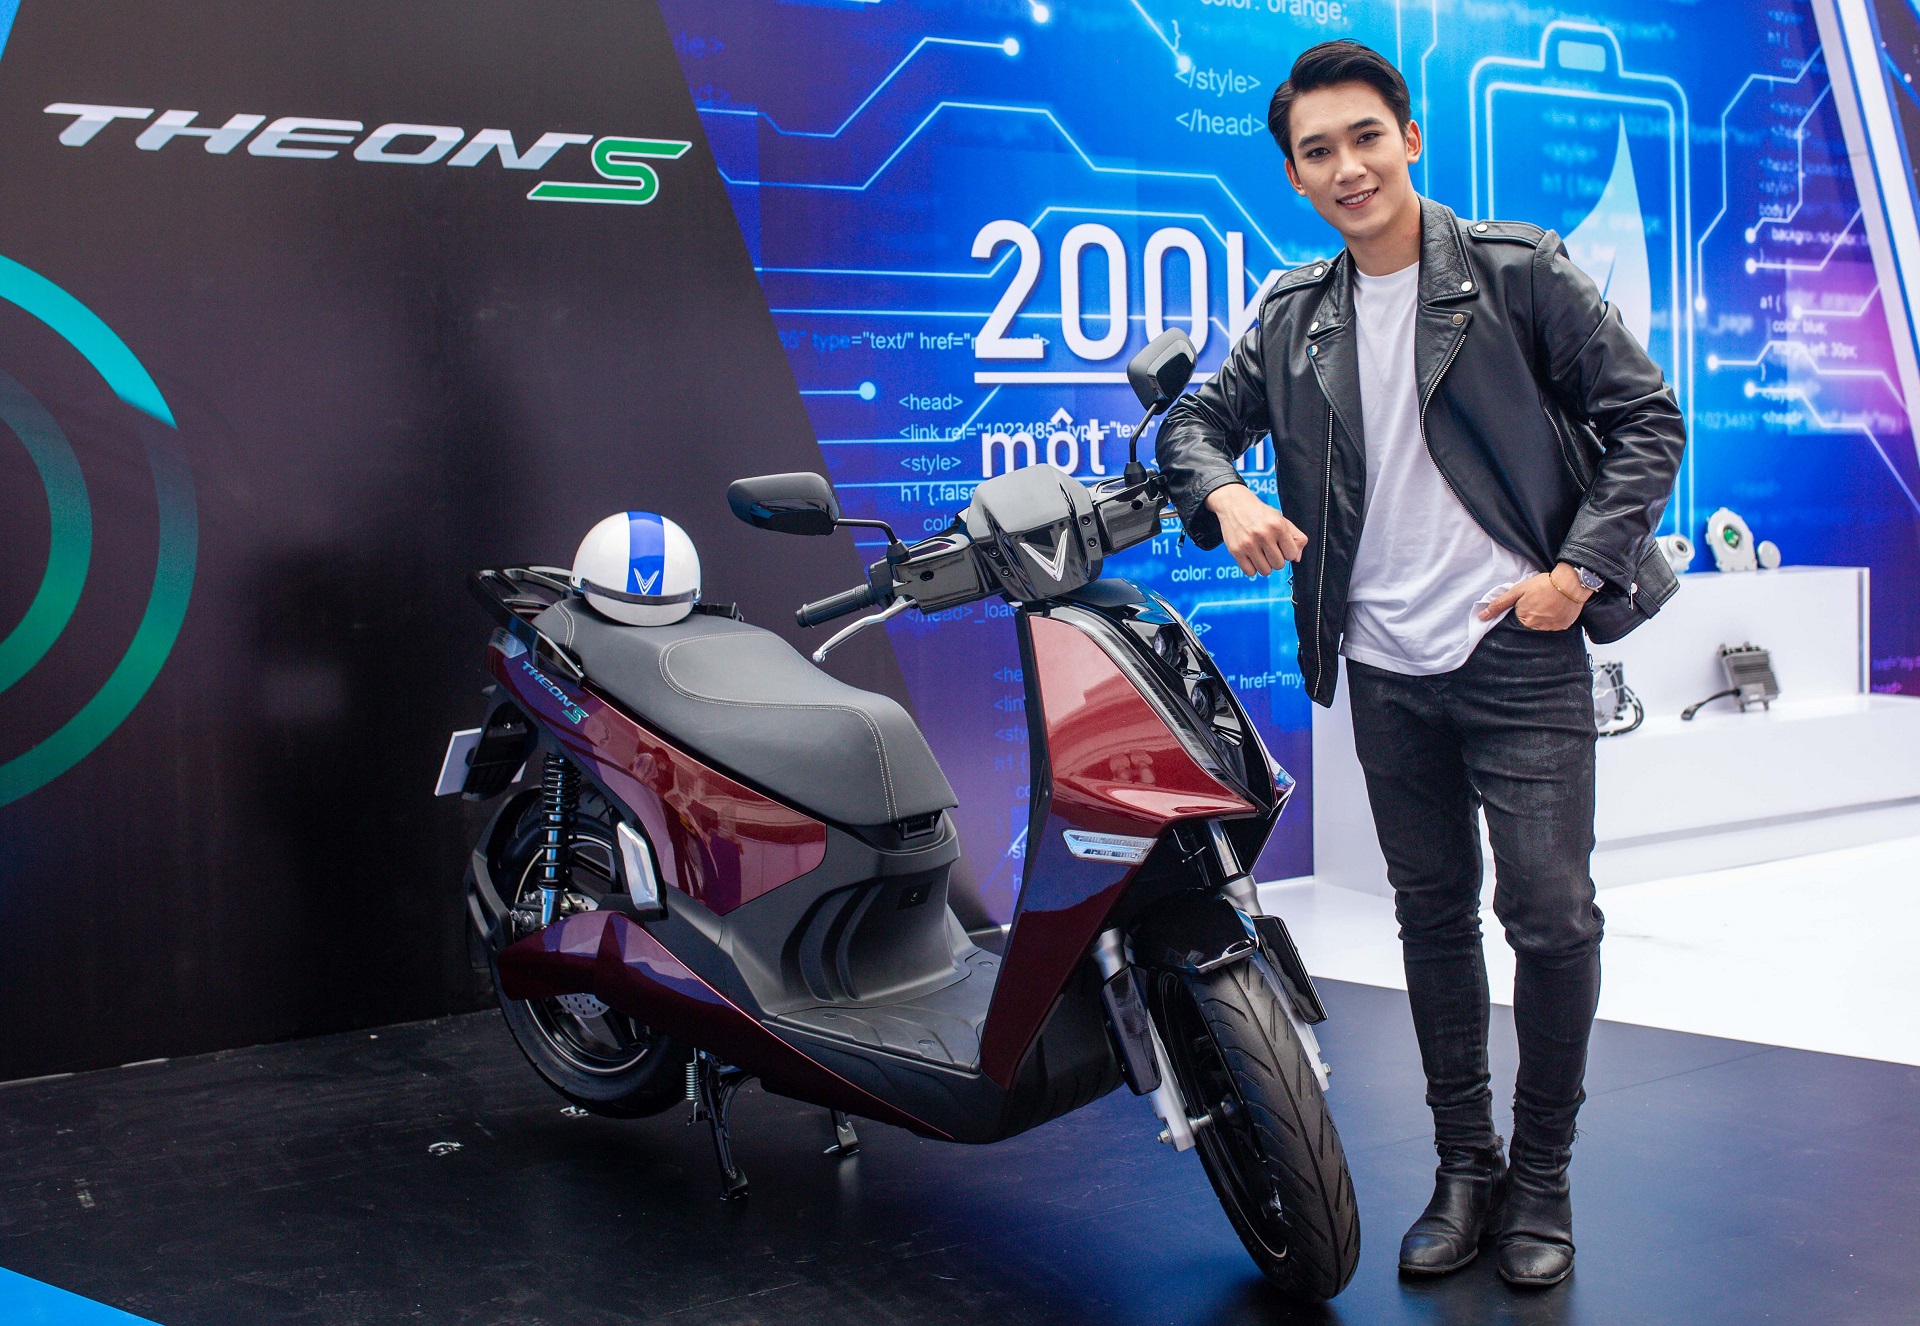 VinFast Theon S - smart electric motorbike for Vietnamese people - Photo 2.